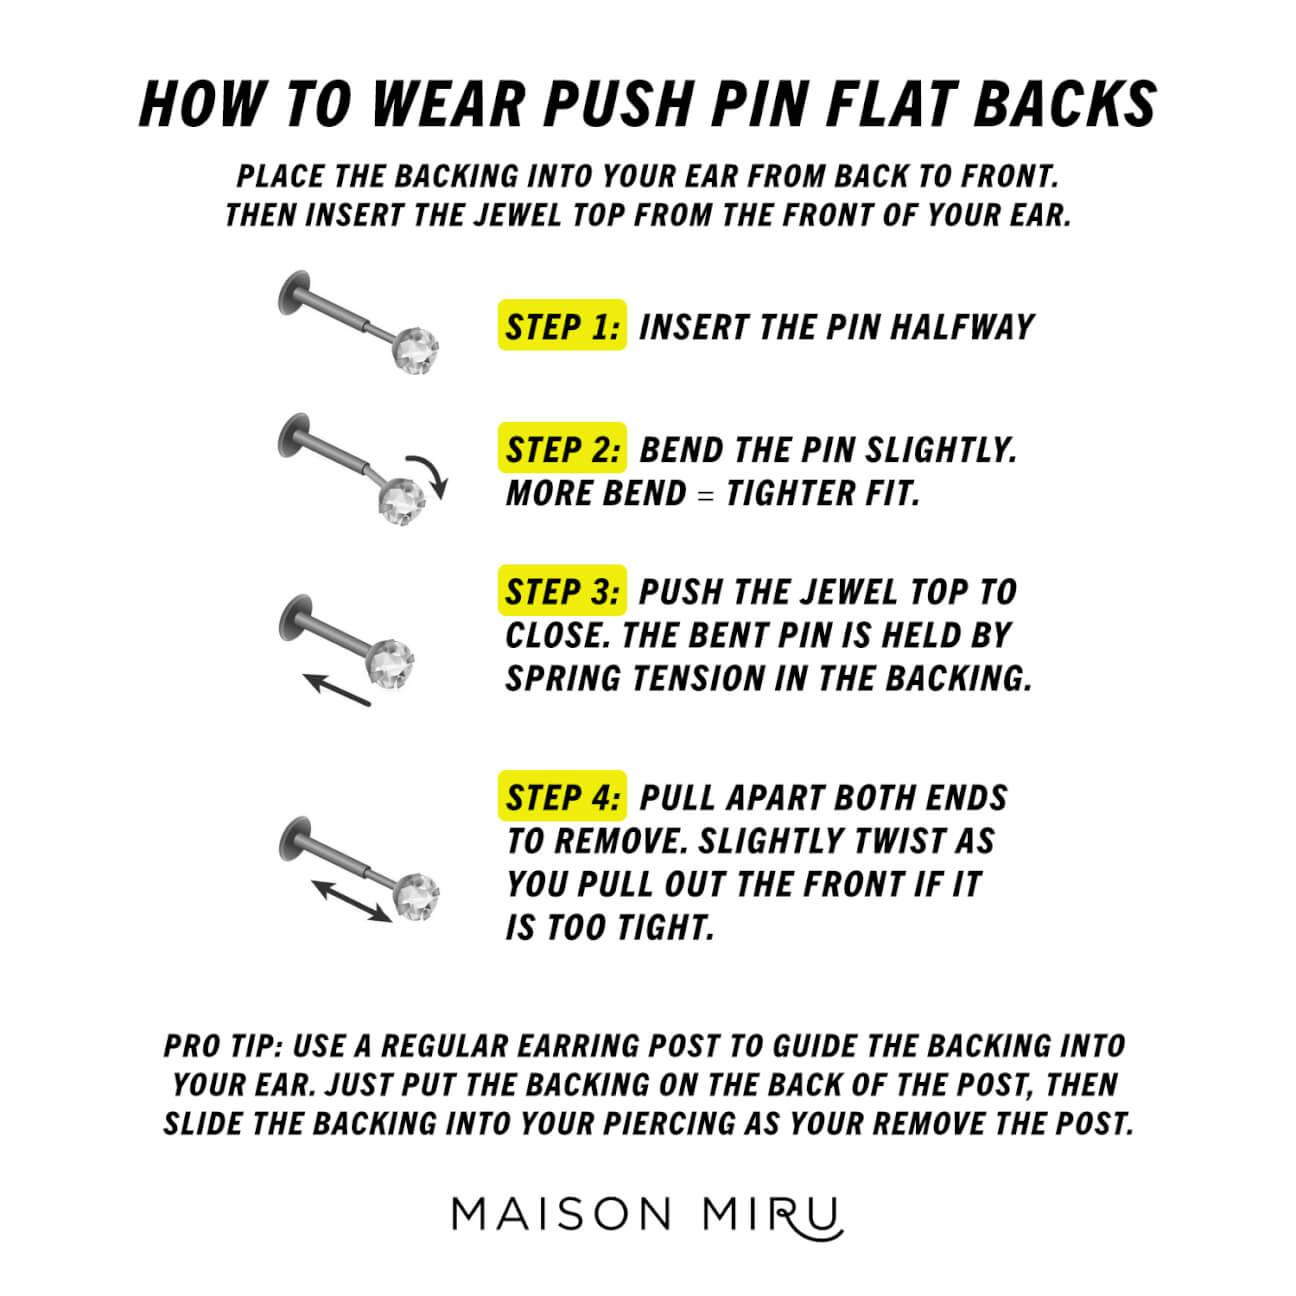 How to Wear The Classic Star Push Pin Flat Back Earring